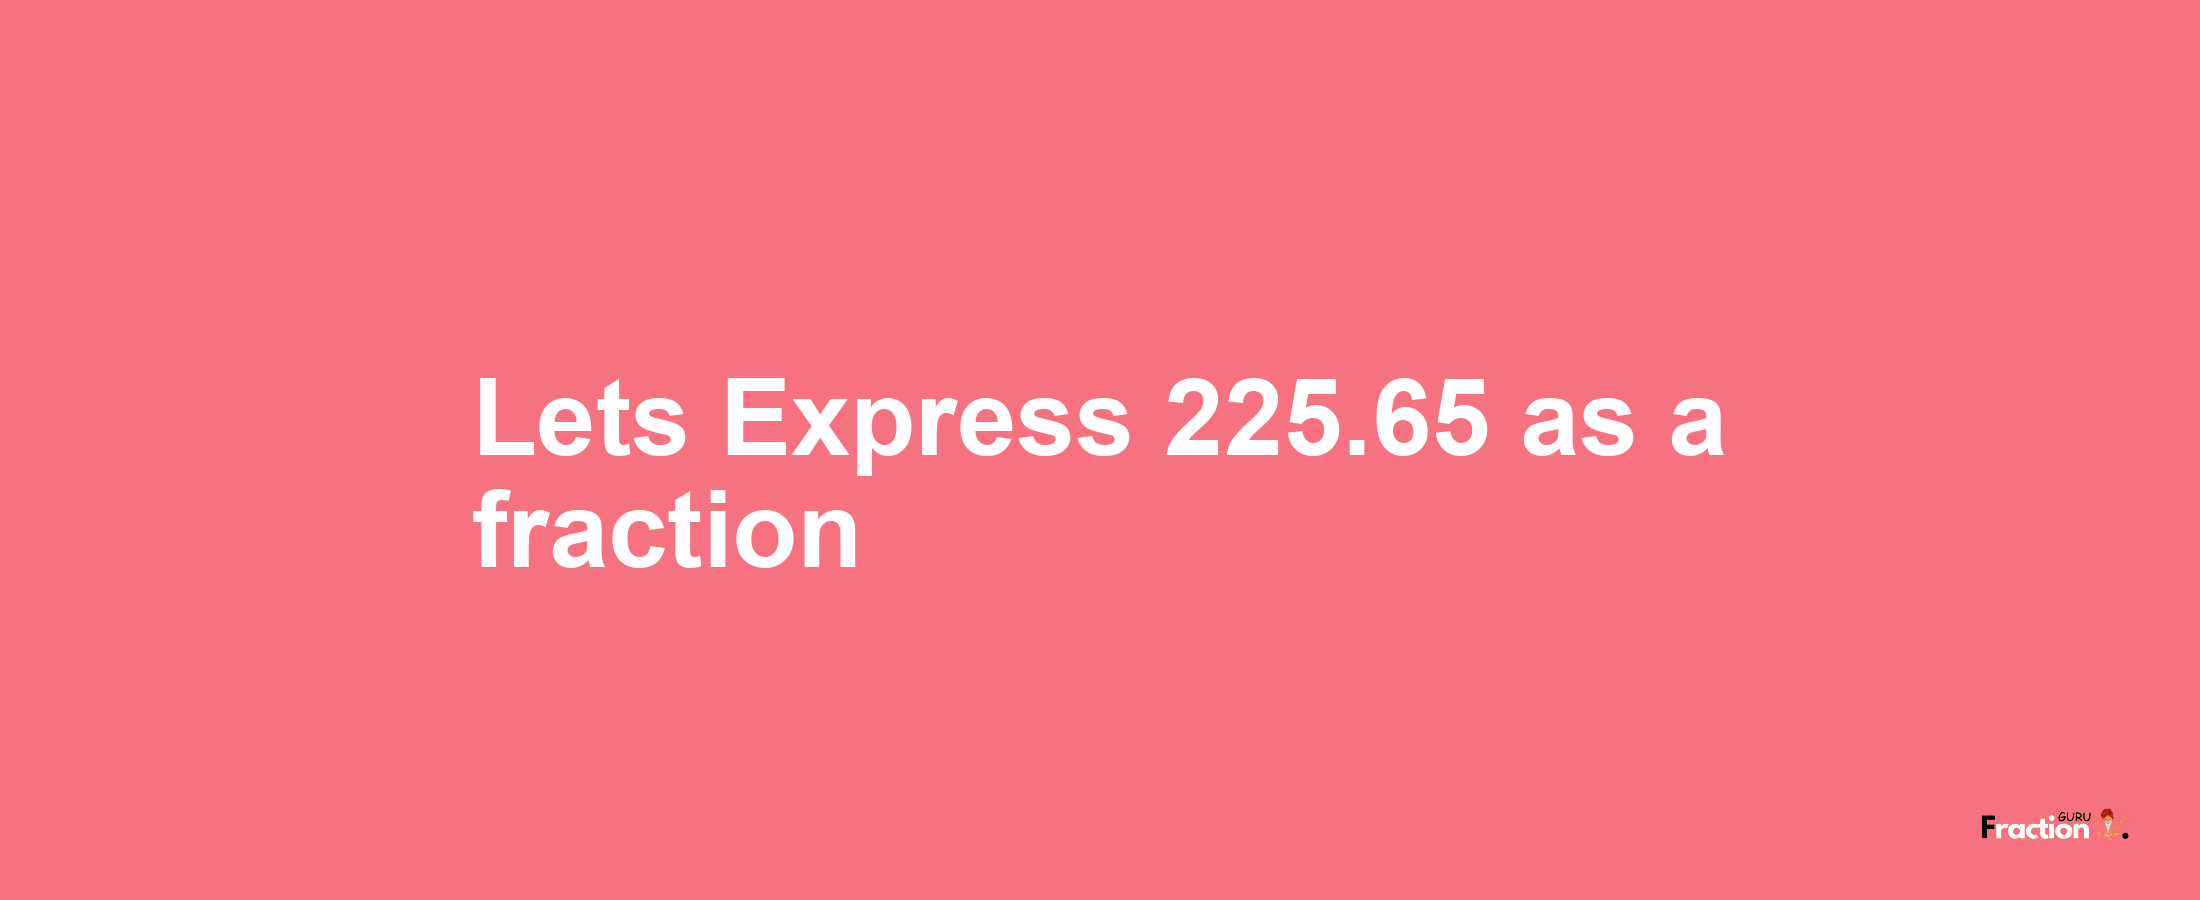 Lets Express 225.65 as afraction